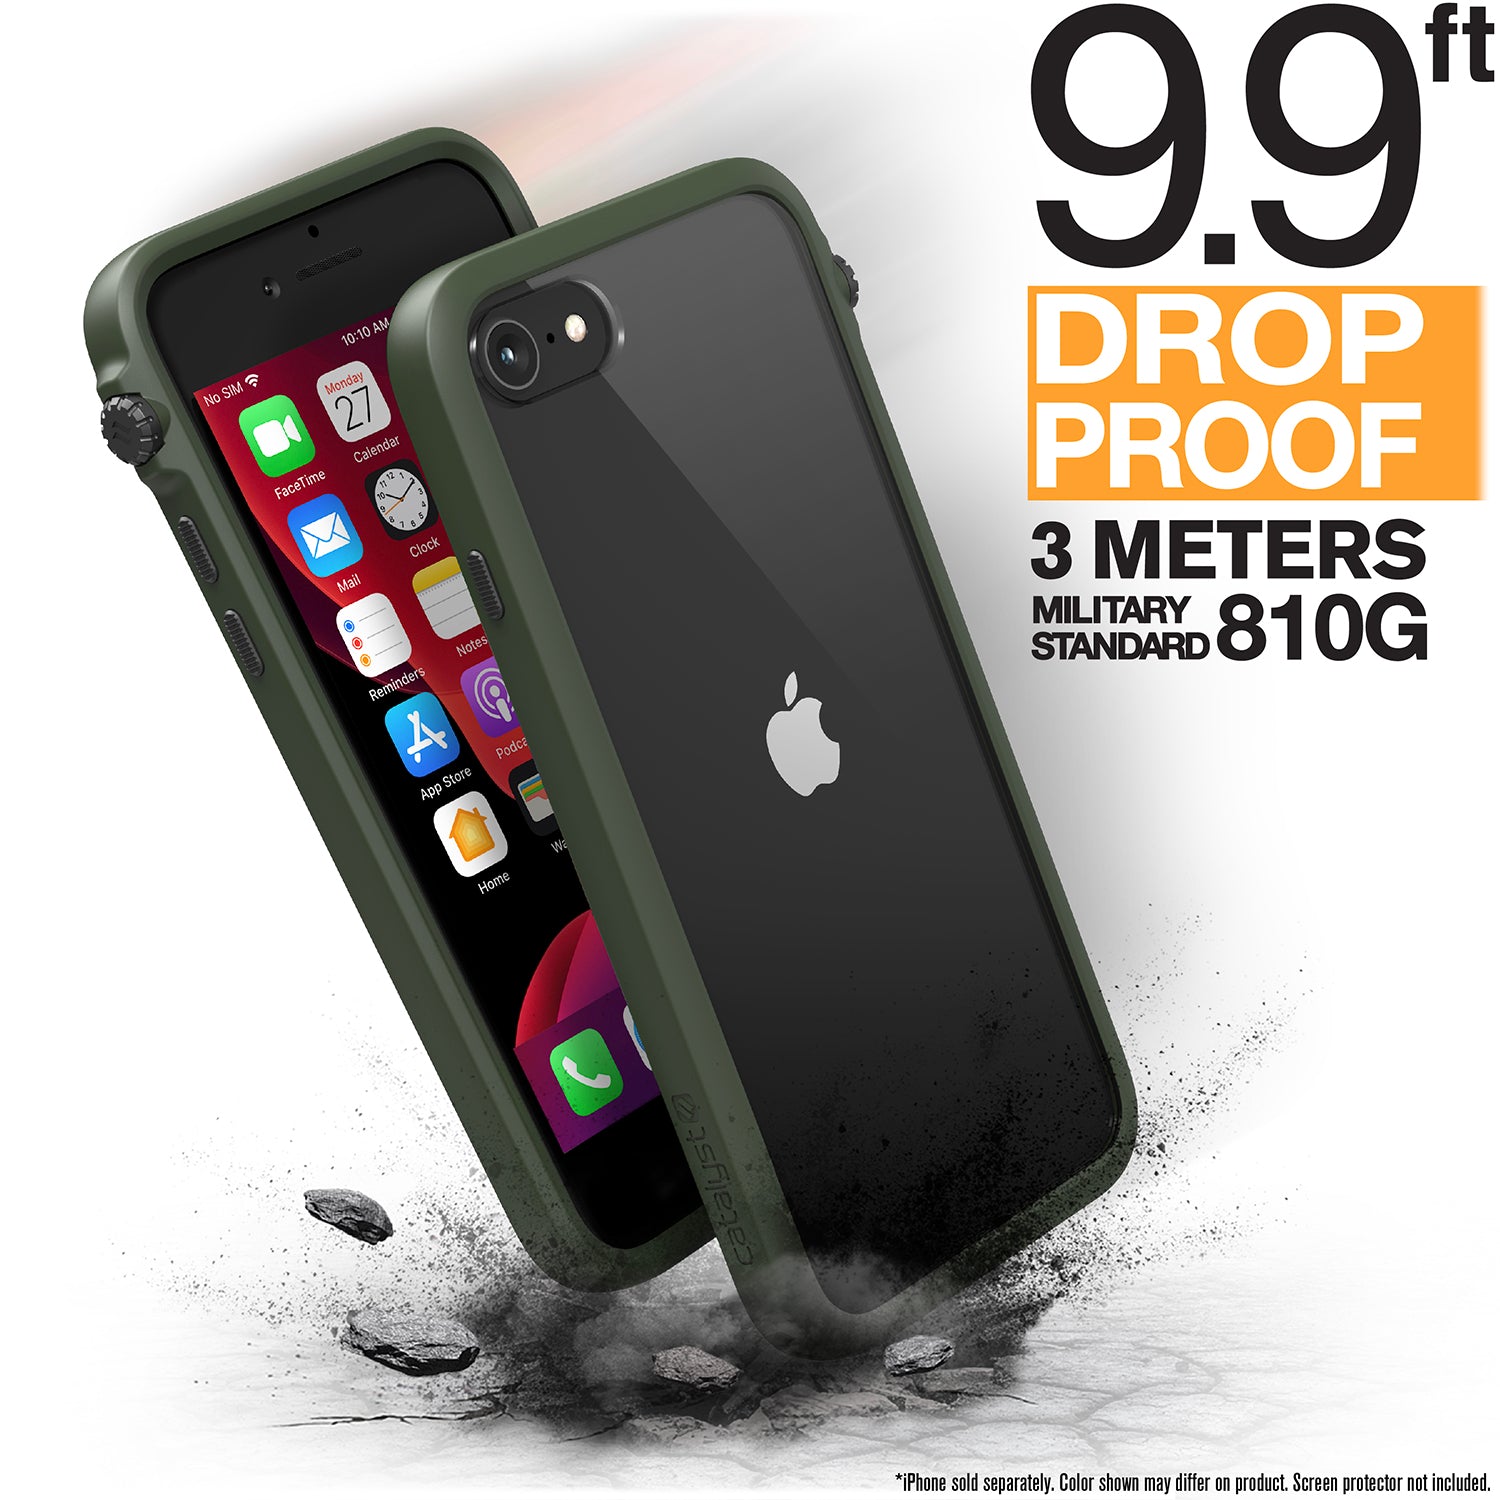 Catalyst iphone 8/7 impact protection case showing how drop proof the case is in a army green colorway text reads 9.9 ft drop proof 3 meters military standard 810g